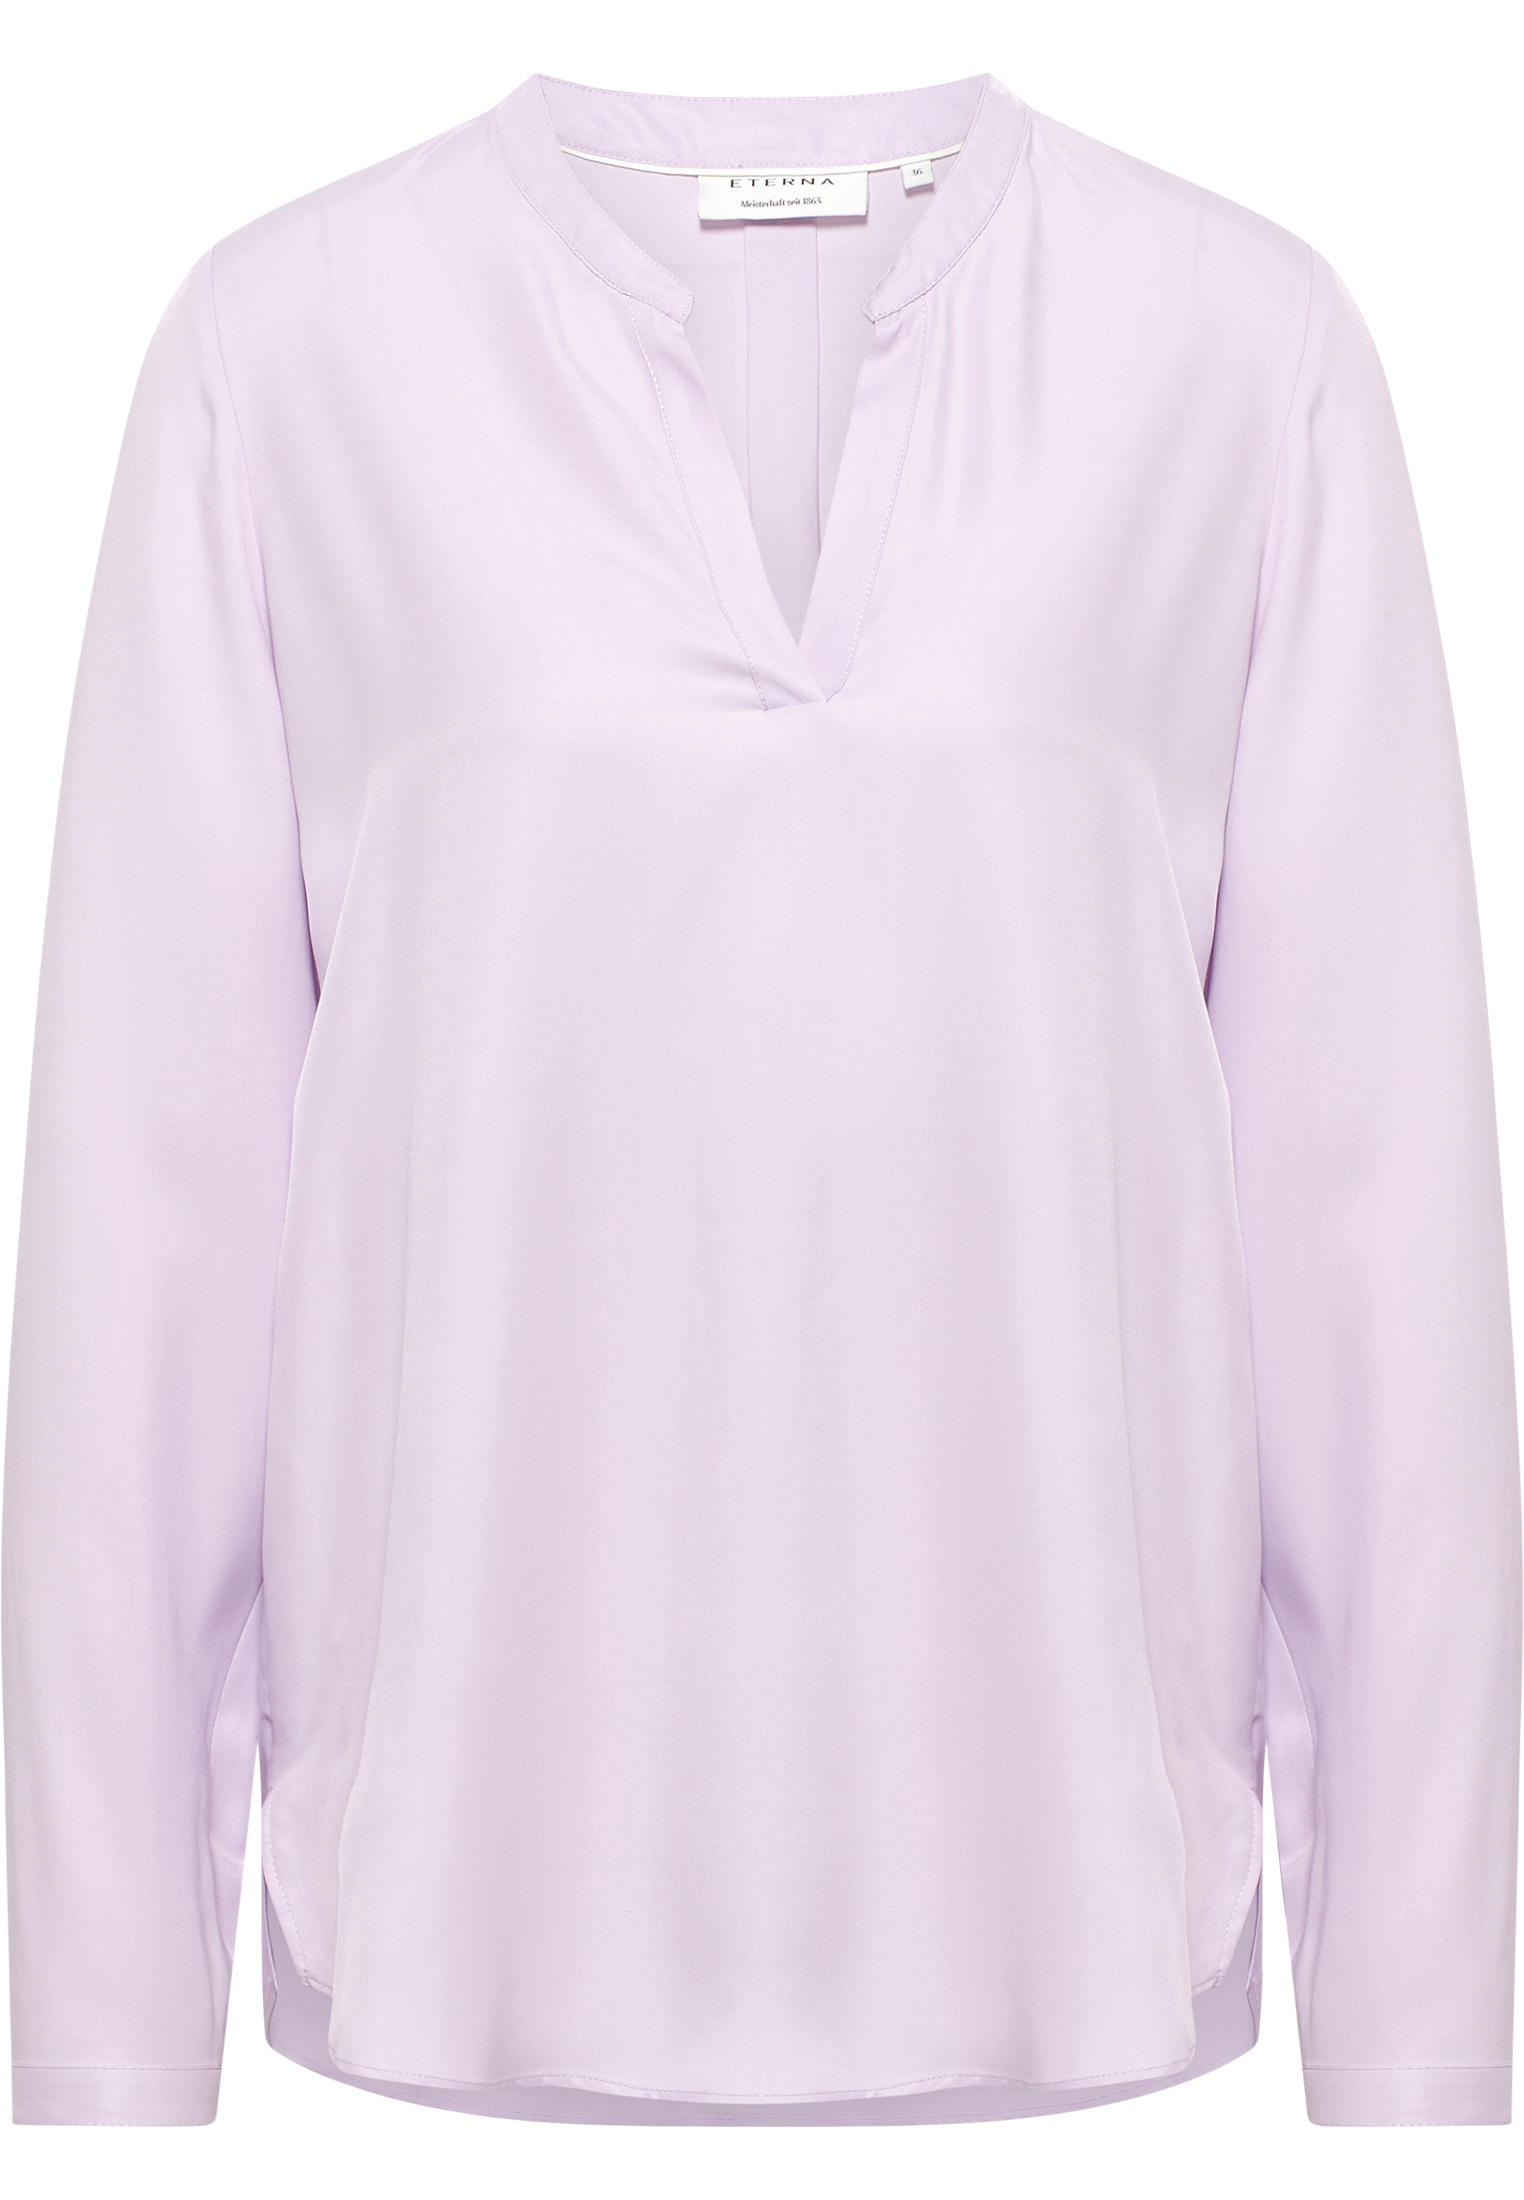 Viscose Shirt Bluse in | unifarben orchid 48 | 2BL04297-09-21-48-1/1 Langarm | | orchid